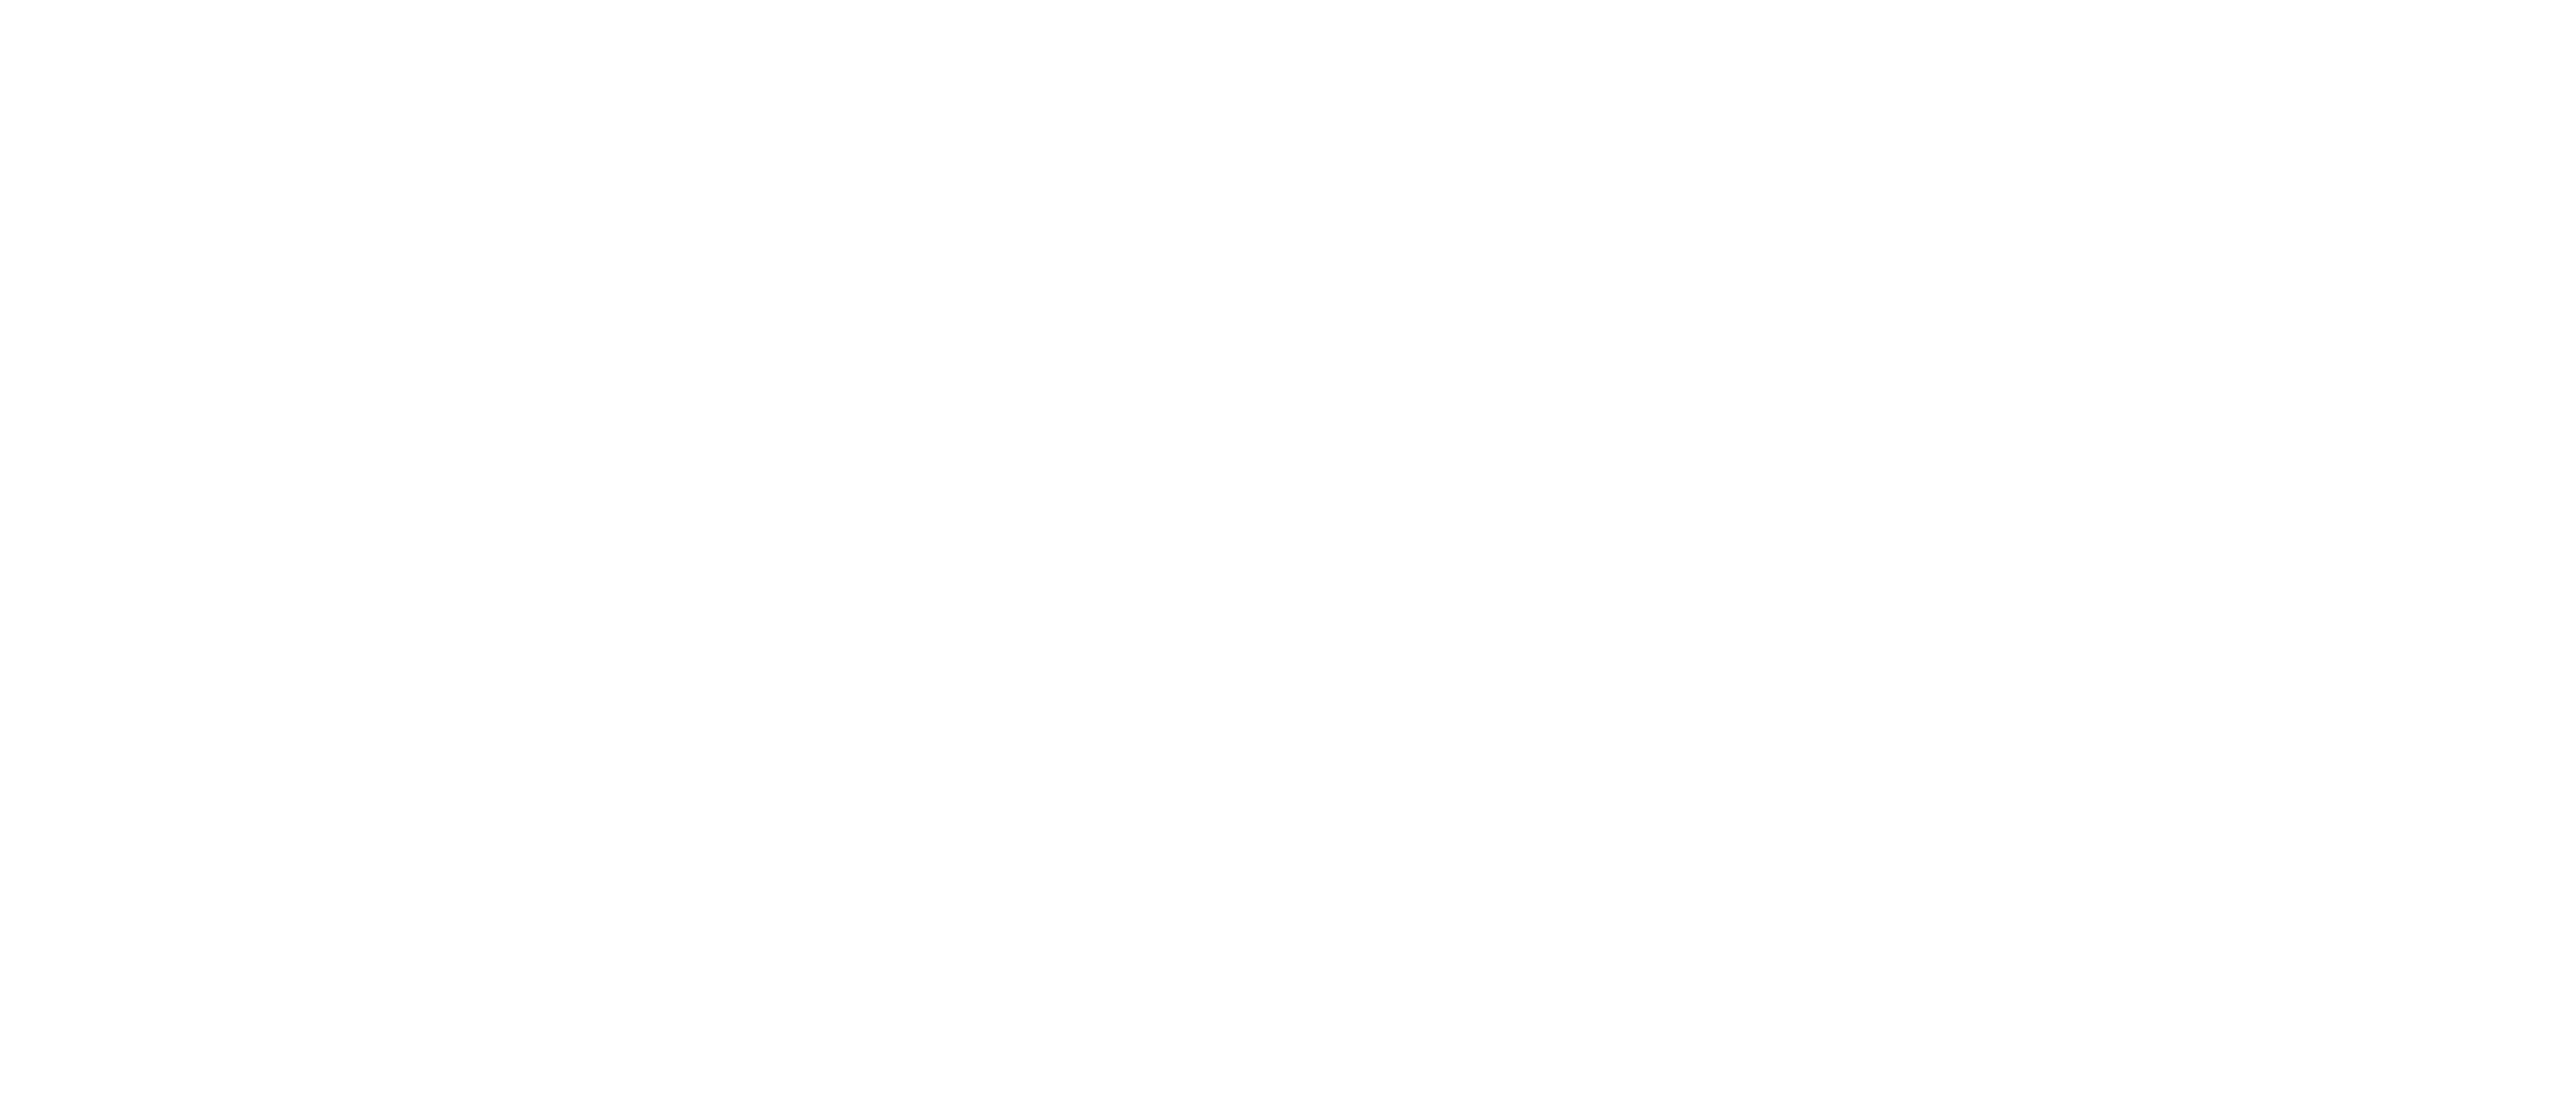 Cable & plastic Test Equipment Suppliers | Tech Trivial